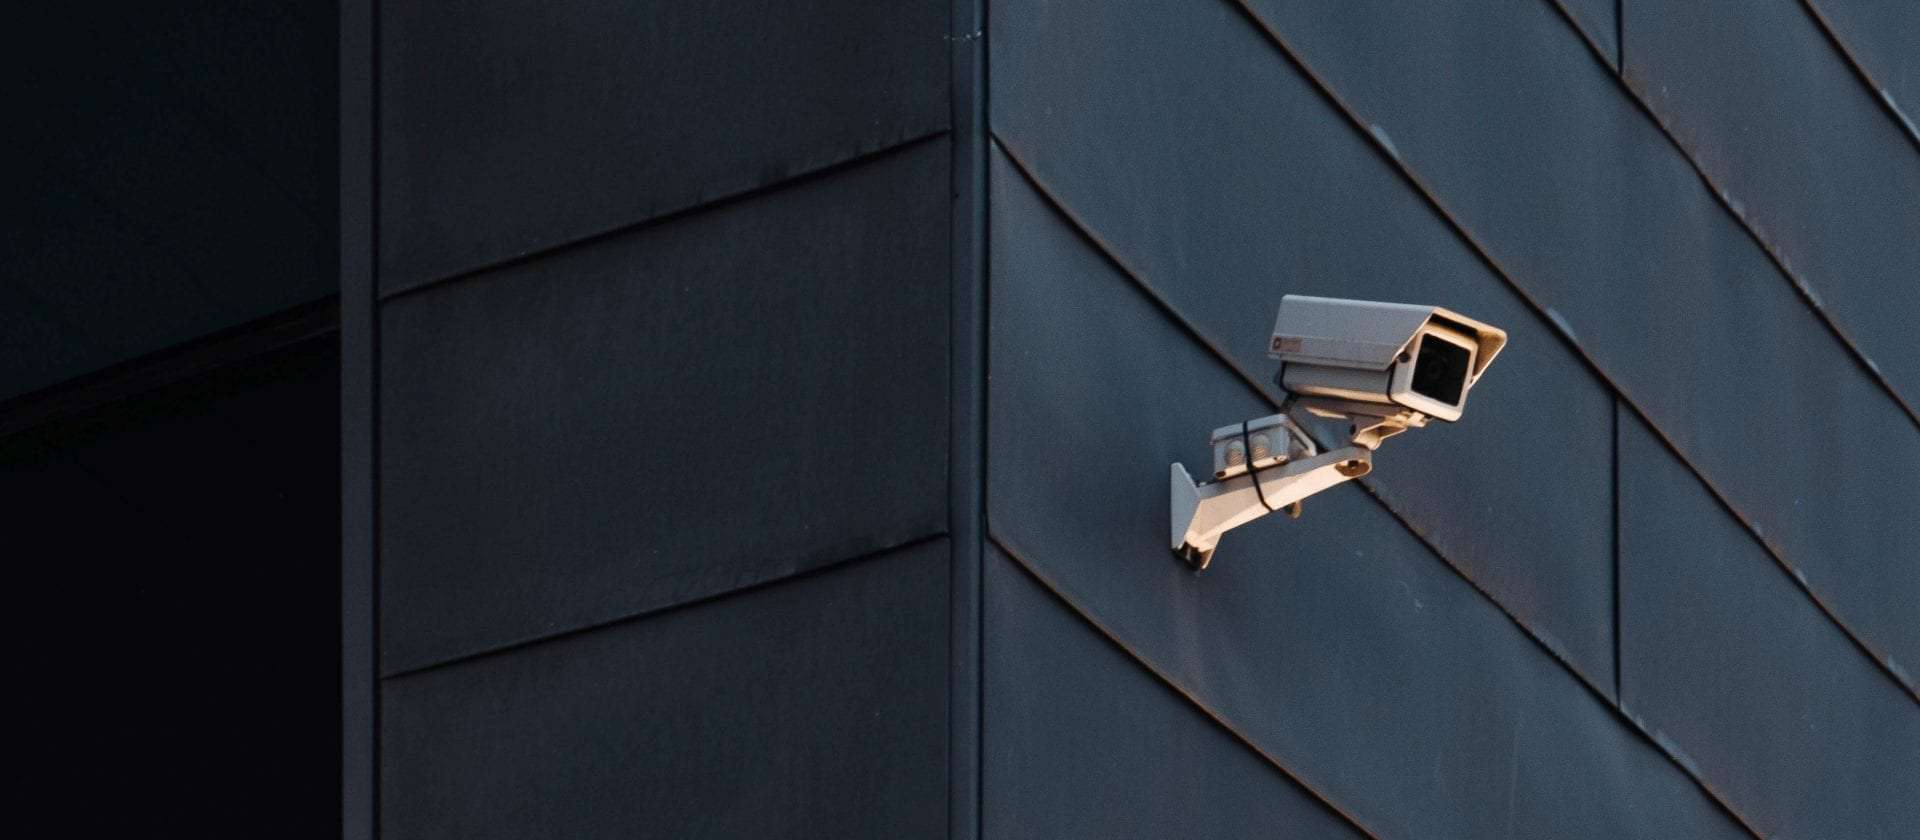 Surveillance physical security measures